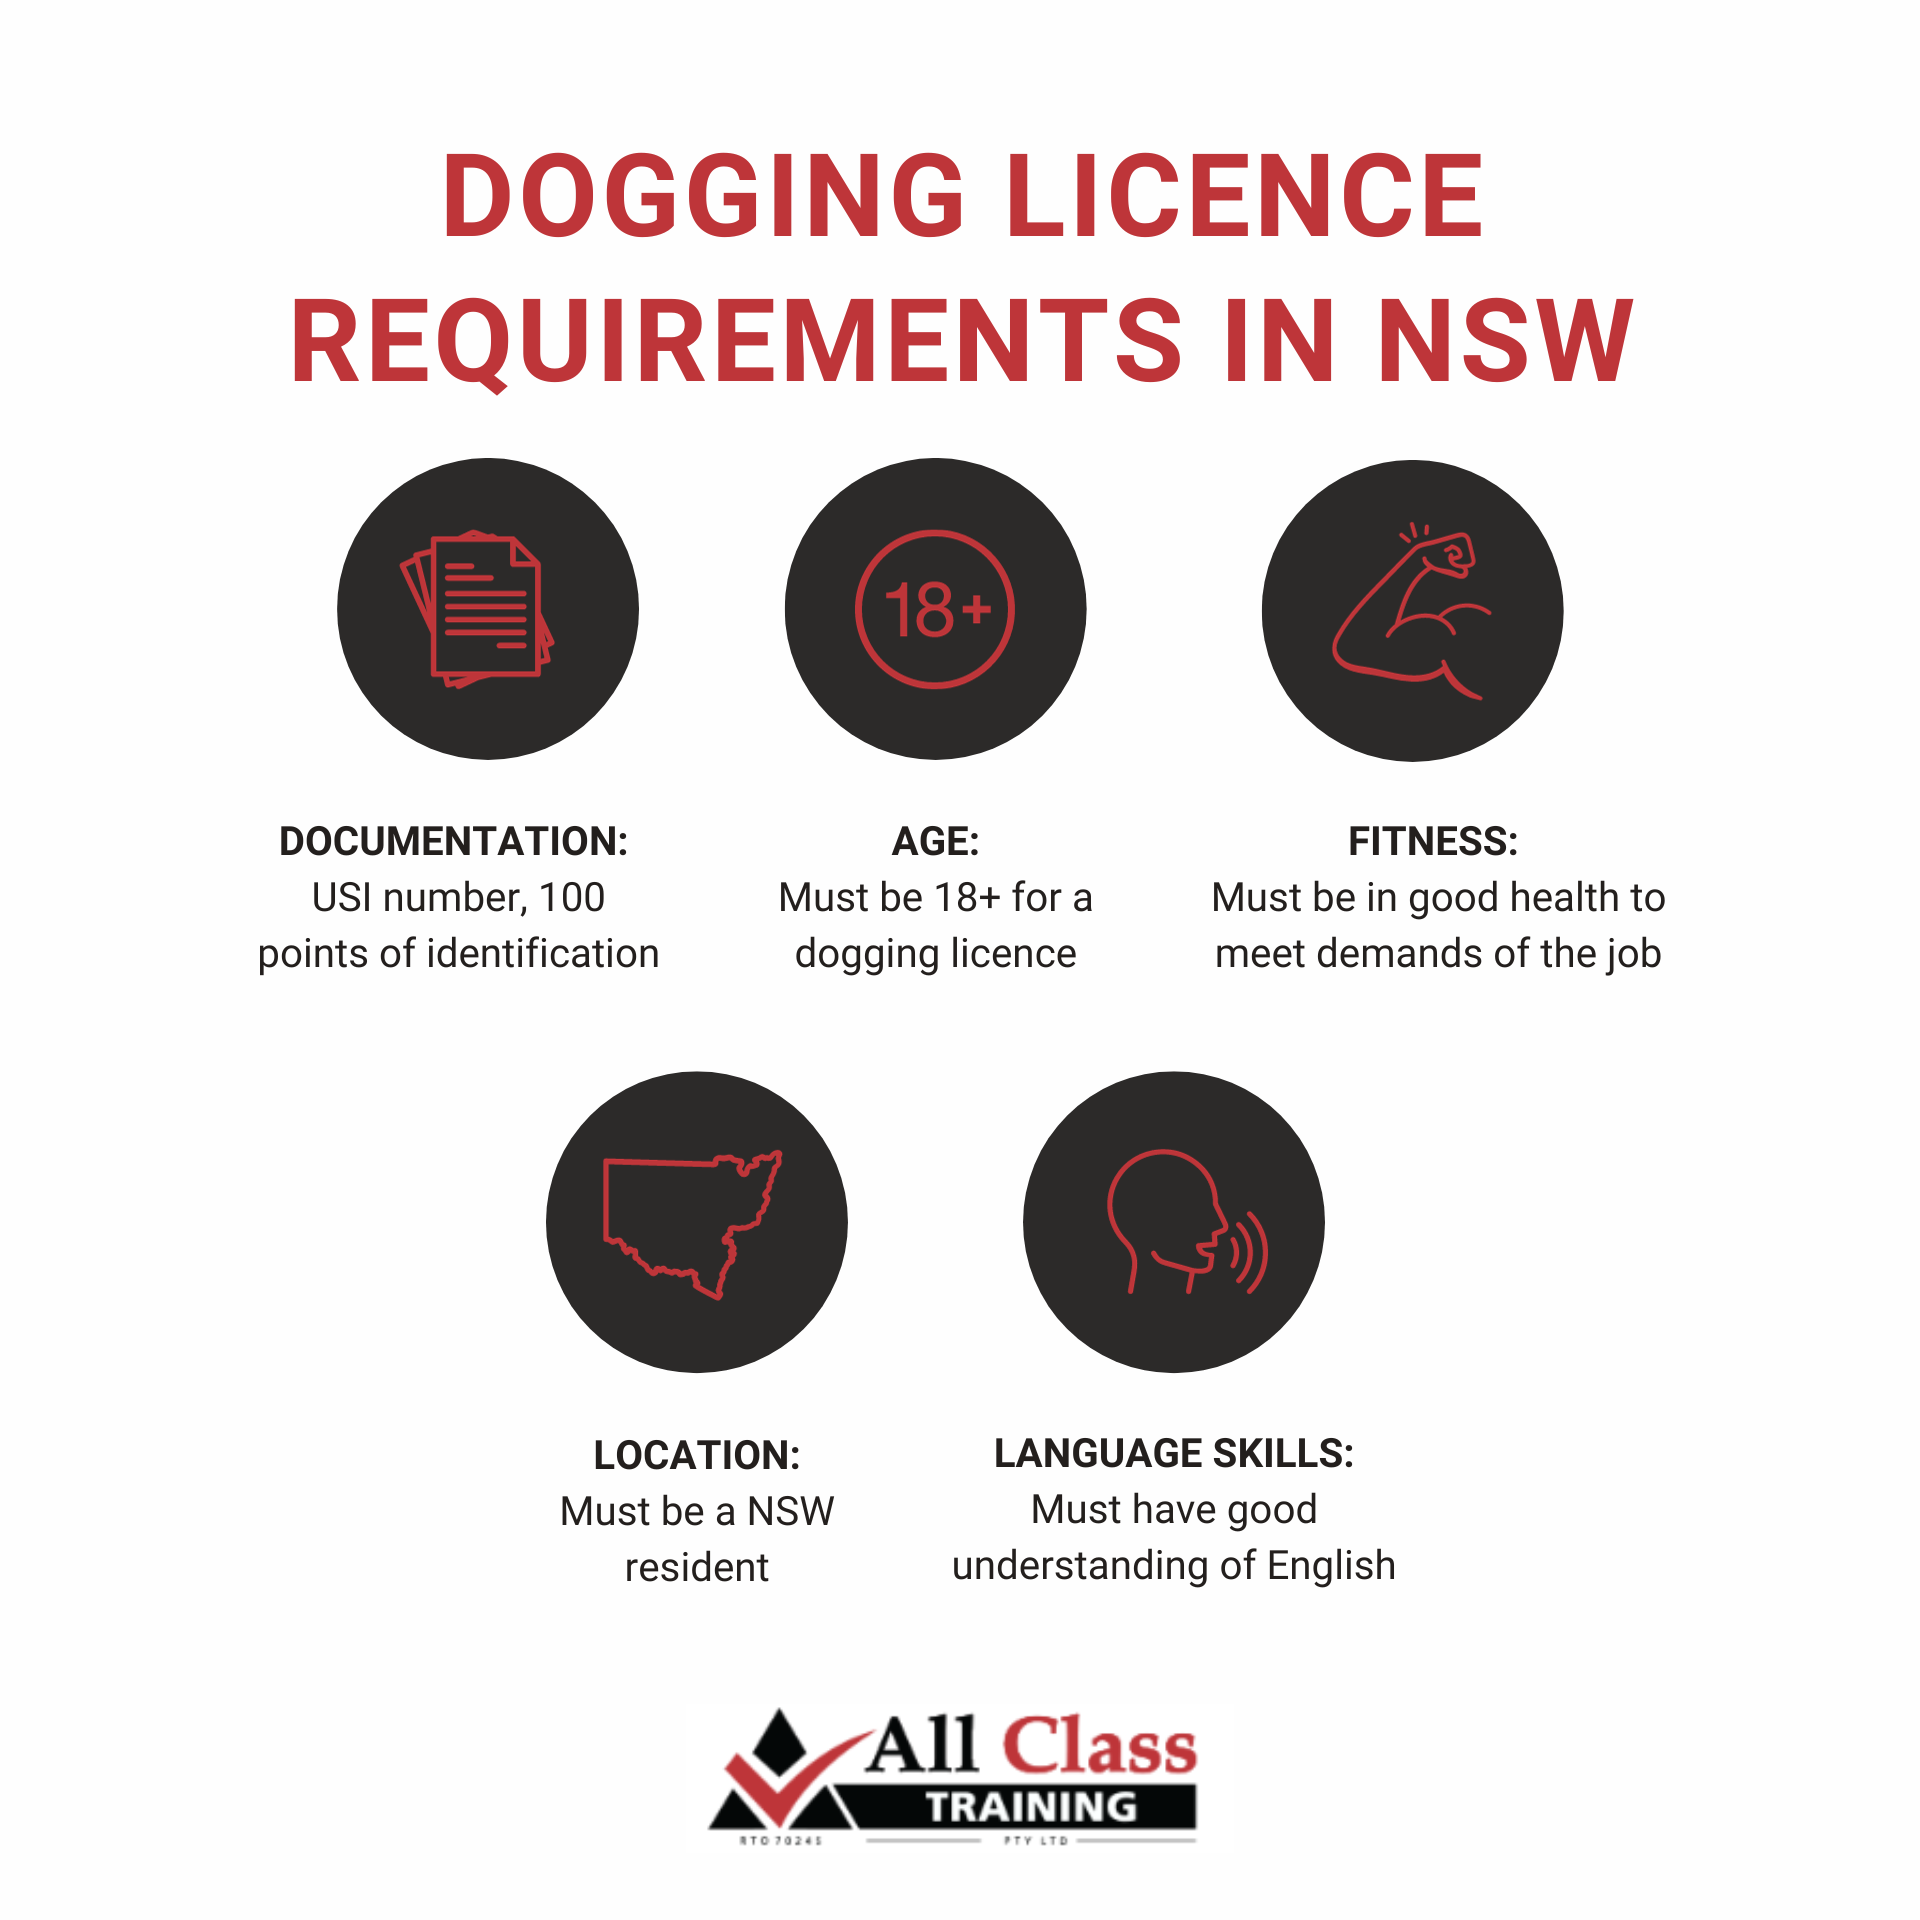 how to apply for a dogging licence in nsw